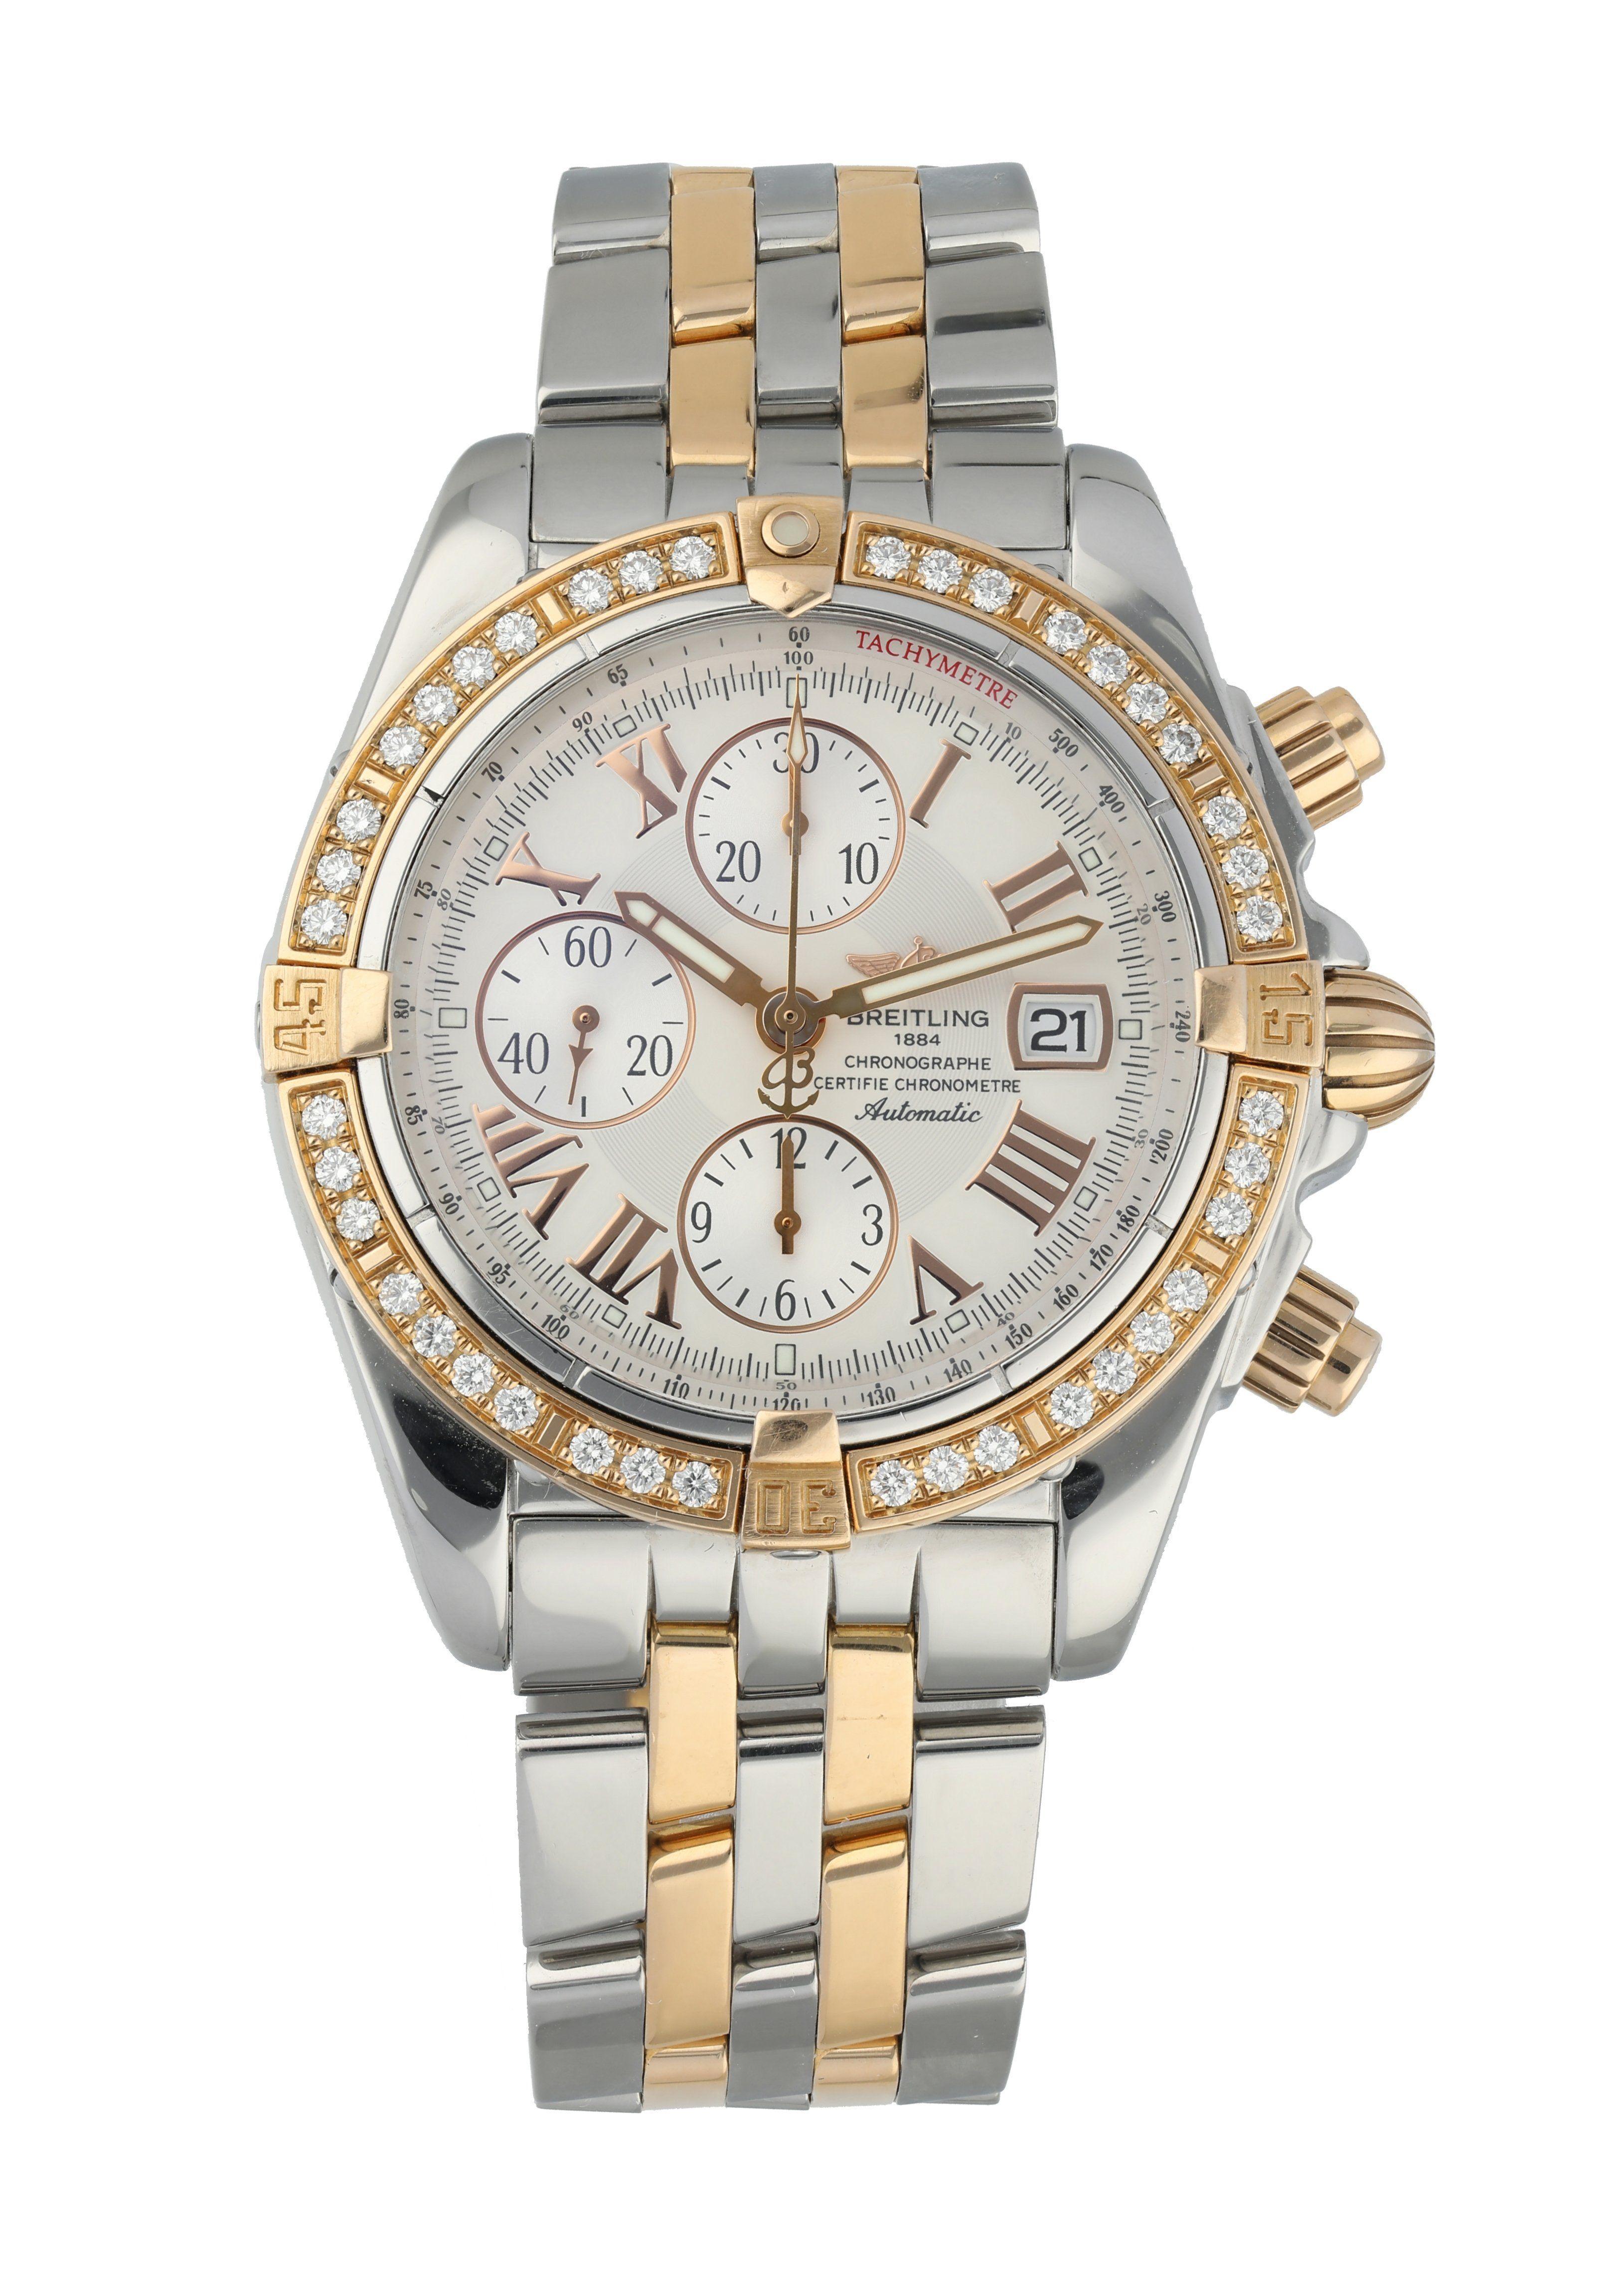 Breitling Chronomat Evolution C13356 Men's Watch. 
44mm Stainless Steel case. 
Factory diamond bezel in 18k Rose Gold.  
Silver dial with gold hands and Arabic numeral hour markers. 
Minute markers on the outer dial. 
Date display at the 3 o'clock